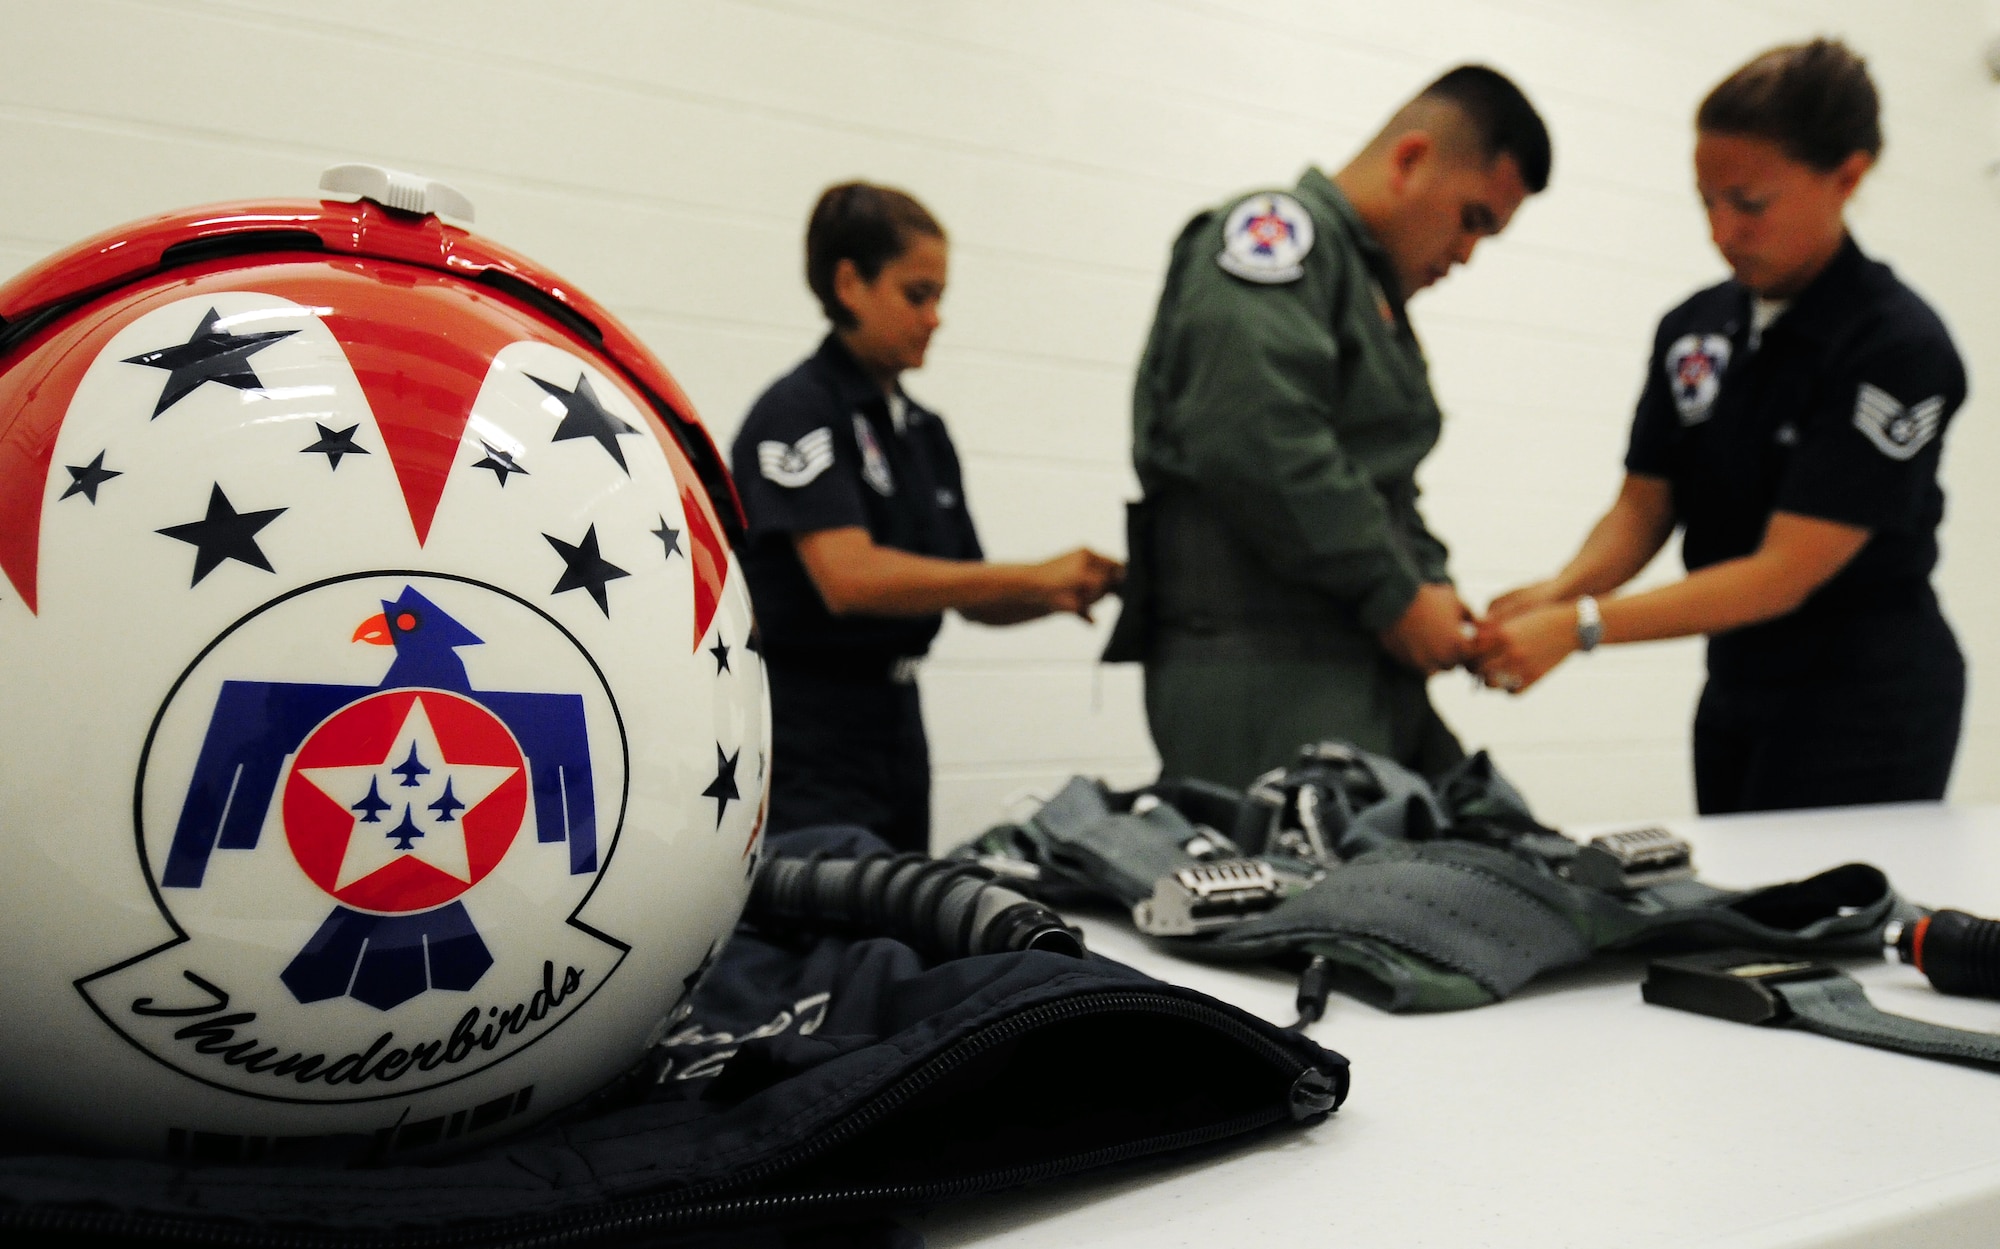 ANDERSEN AIR FORCE BASE, Guam - Staff Sgt. Robbin Bailon, U.S. Air Force Thunderbirds assistant flight equipment,and Staff Sgt. Kristi Machado, Thunderbirds Aerial Photographer, fits Army Sgt. Dan Elliott with life support gear before his Hometown Hero Flight Oct. 6. The Thunderbirds flew Sgt. Elliott in the back seat of an F-16 Falcon over Andersen AFB and the island of Guam. The Thunderbirds are scheduled to perform in an air show over Andersen AFB Oct. 7. (U.S. Air Force photo by Airman 1st Class Courtney Witt)